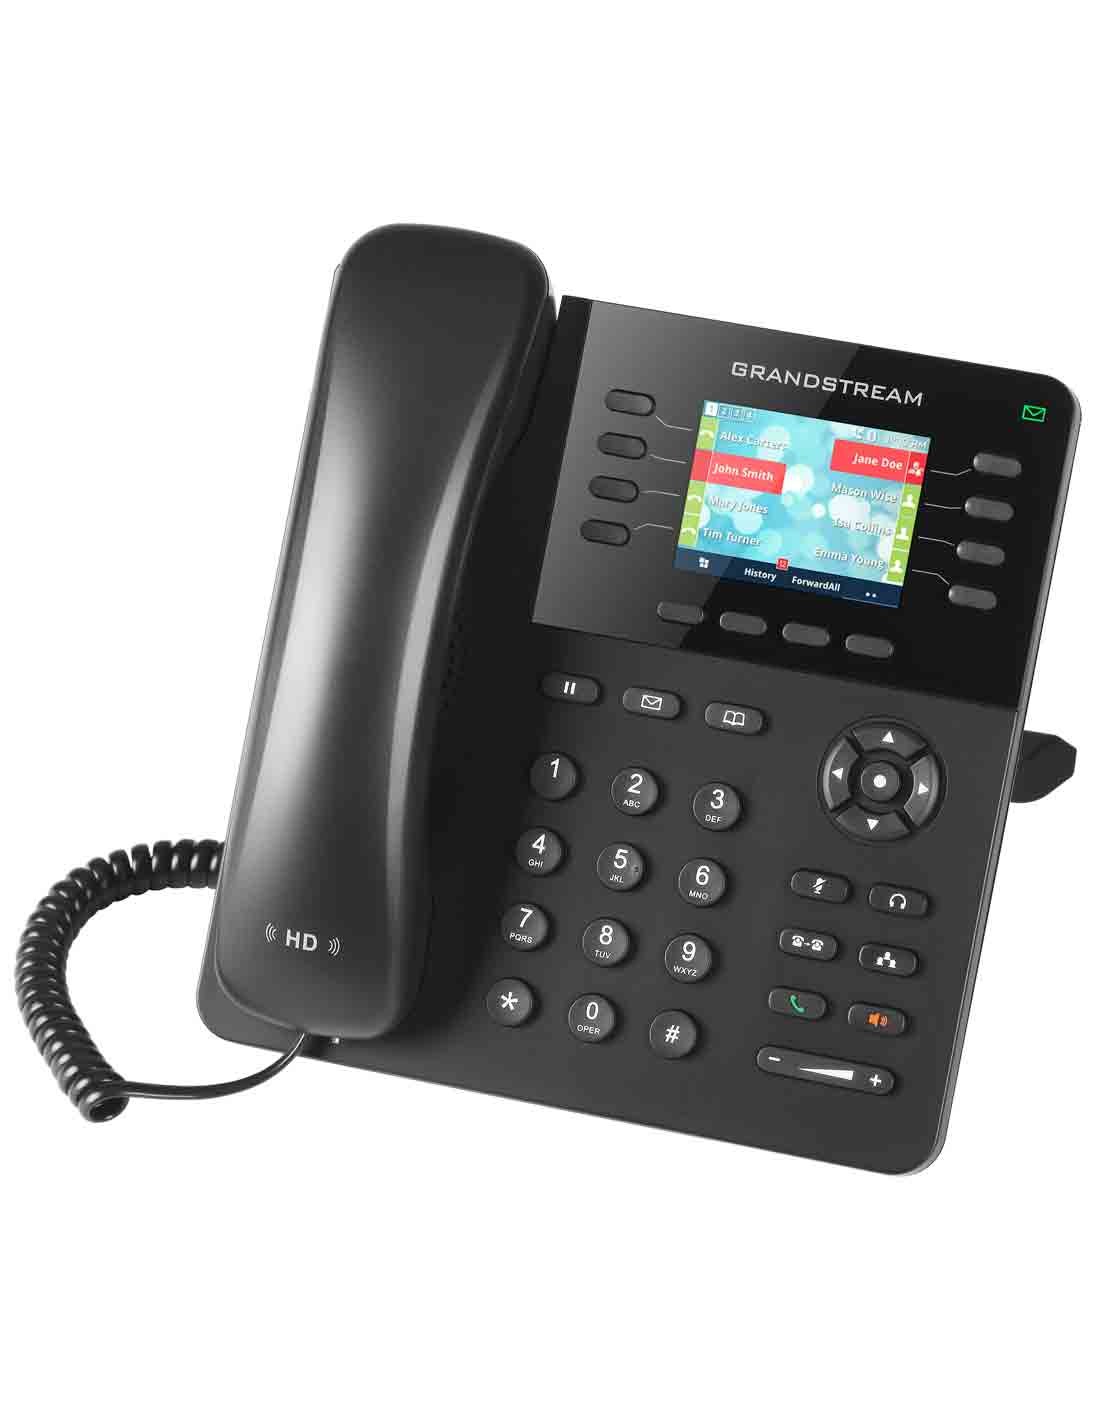 Grandstream GXP2135 High-End IP Phone with best deal options - a cheap price and free delivery in Dubai